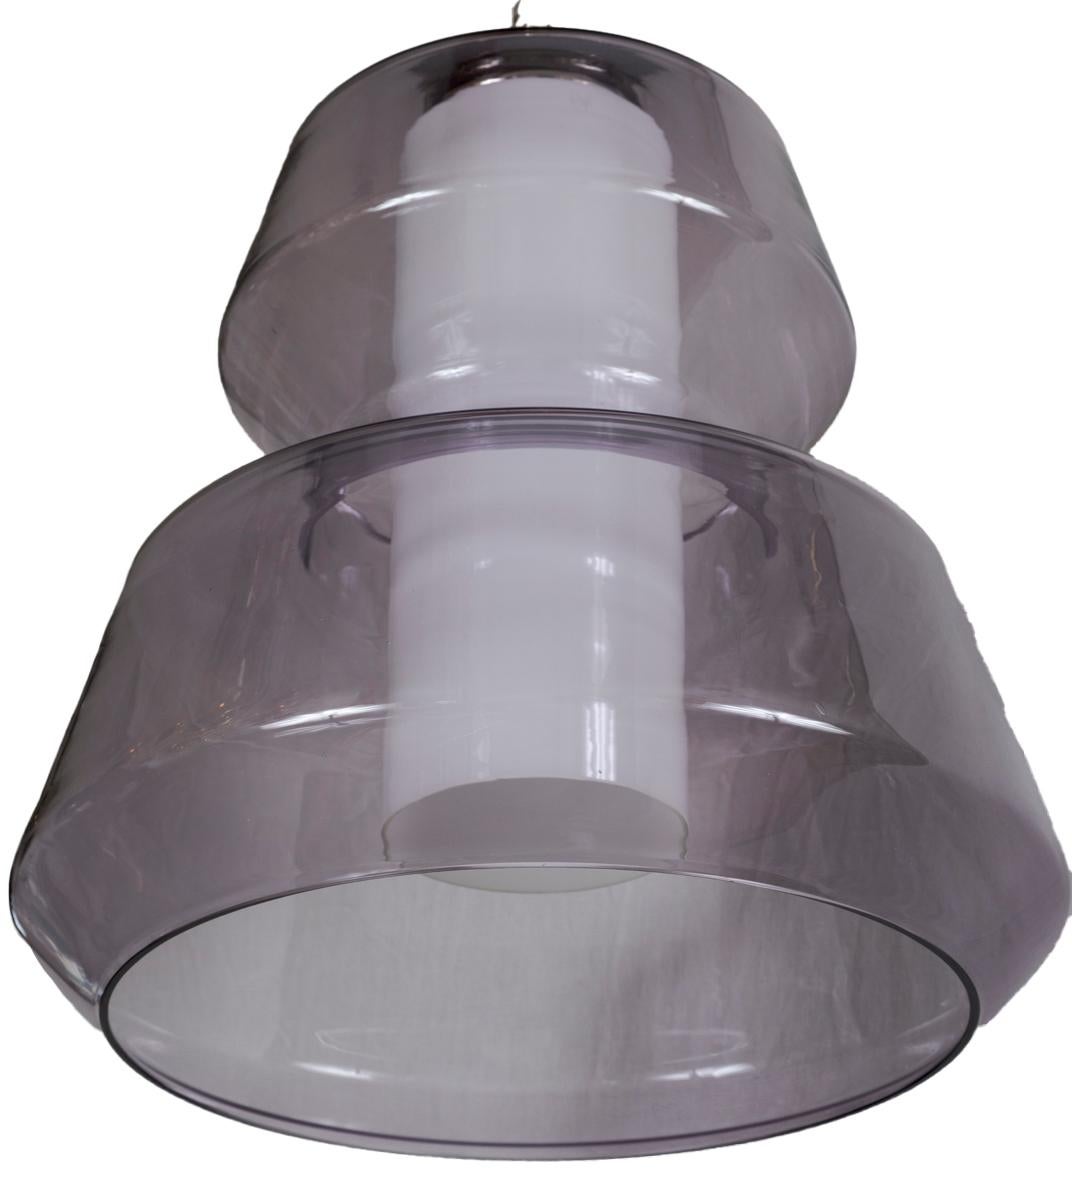 Wonderful Italian lilac colored geometric glass with white opaque cylindrical glass shade.
Re-electrified with one E26 socket and mounted with a  stunning geometric shaped nickel on brass chain.
Dating:1970-1980ca
Origin: Murano, Italy, 
Dimensions: